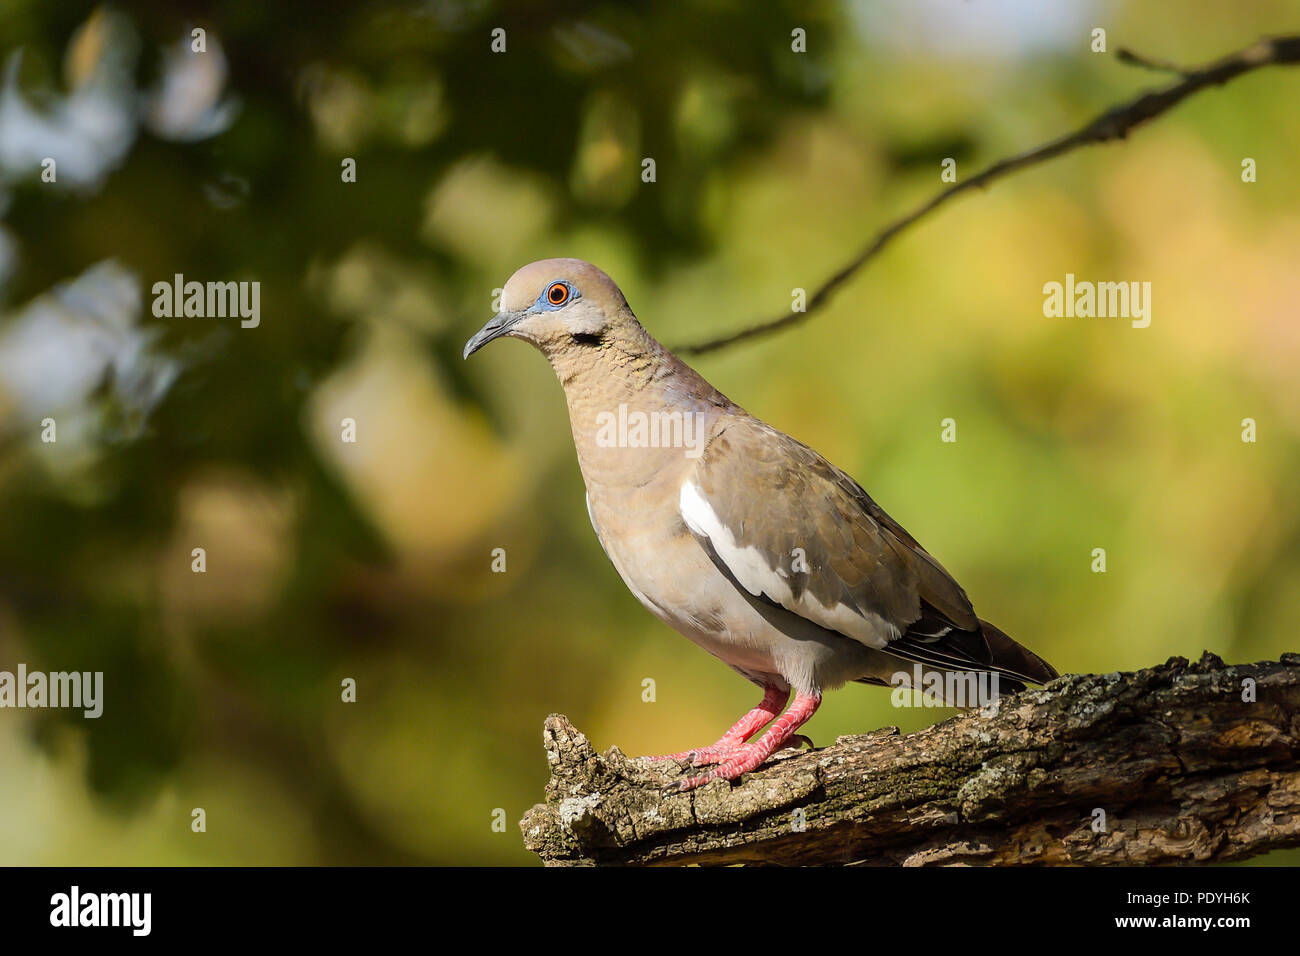 The White-winged dove Zenaida asiatica is valuable as a game bird in Texas and American southwest.  This one is perched in tree limb. Stock Photo